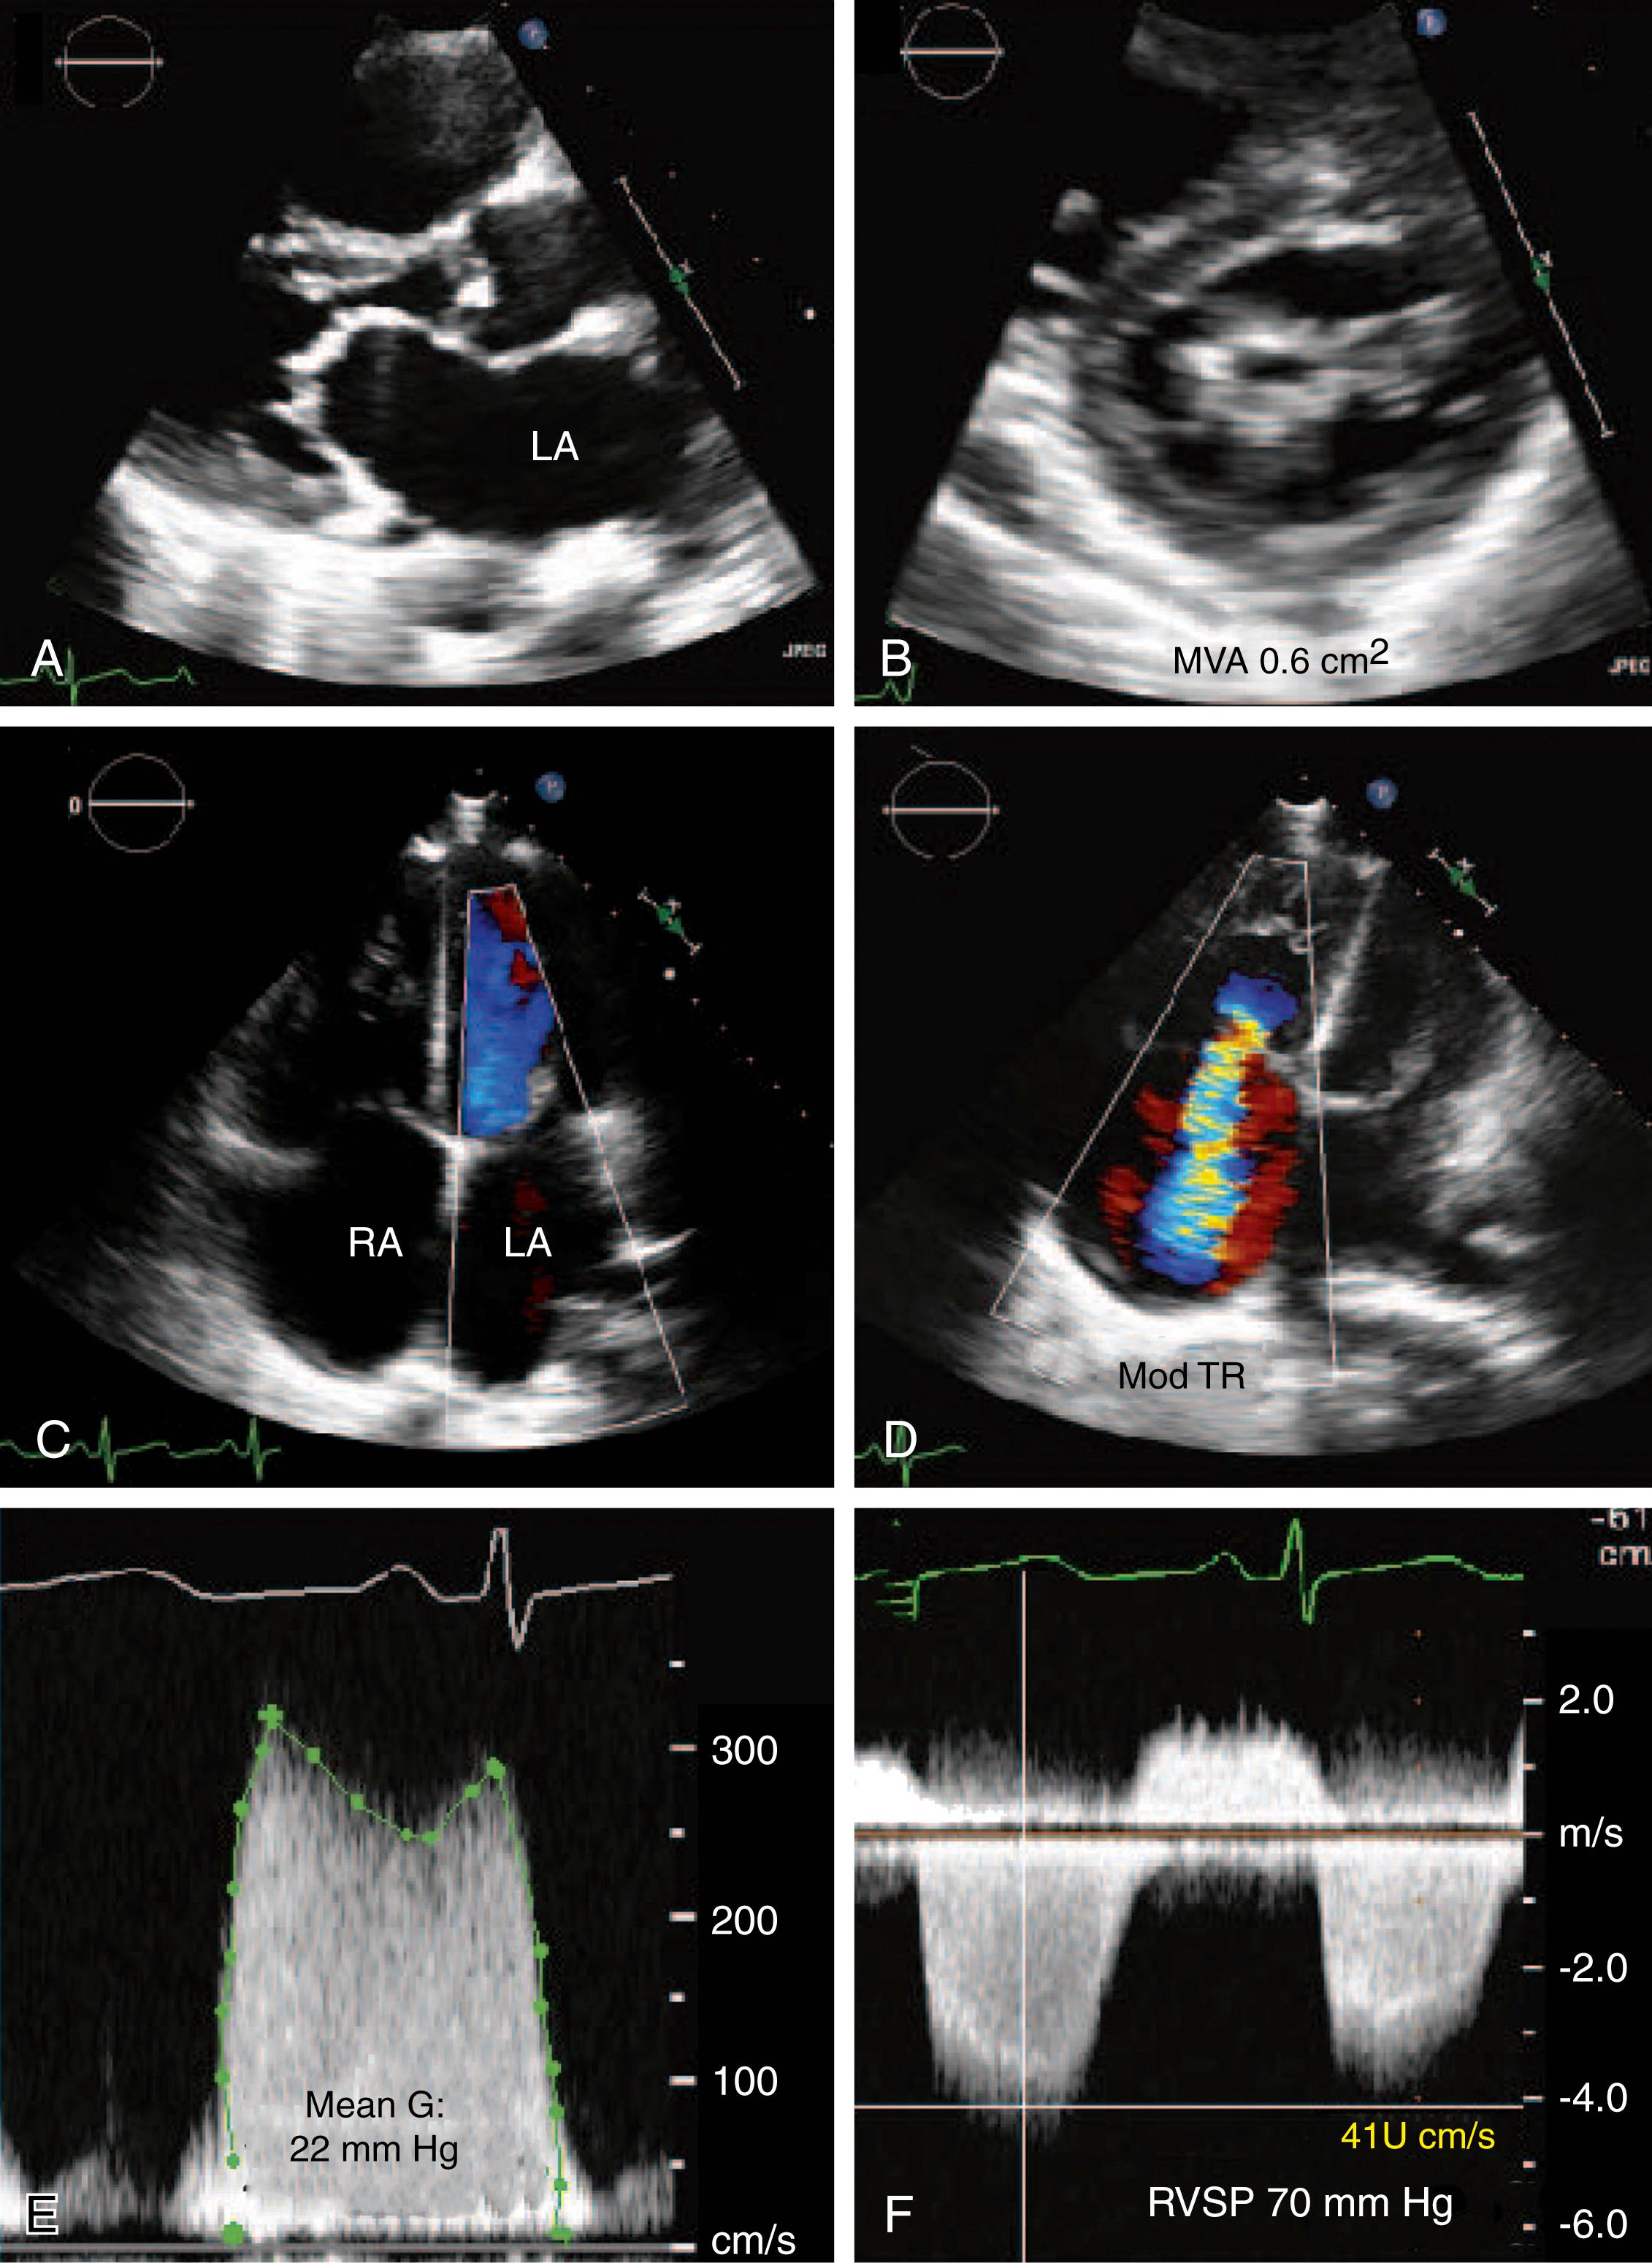 Figure 165.2, Rheumatic mitral stenosis (MS) severity. A 22-year-old woman with rheumatic heart disease, including tricuspid regurgitation, mitral stenosis, and mixed aortic valve disease with resultant pulmonary hypertension, who presented with decompensated heart failure and atrial fibrillation. A, Left parasternal view of the mitral valve shows the typical doming and funnel-shaped mitral valve with an associated large left atrium (LA). The Wilkins score was measured at 8. B, Parasternal short-axis view of the mitral valve demonstrates bicommissural fusion and a very small mitral orifice size with a mitral valve area (MVA) of 0.6 cm 2 by planimetry. C, Color Doppler apical four-chamber view demonstrates absence of mitral regurgitation. D, Moderate (Mod) tricuspid regurgitation (TR). E, Apical Doppler transmitral mean gradient of 22 mm Hg consistent with severe MS. F, Severe pulmonary hypertension as demonstrated by the TR-derived right ventricular systolic pressure (RVSP) of 70 mm Hg. G, Gradient; RA, right atrium.